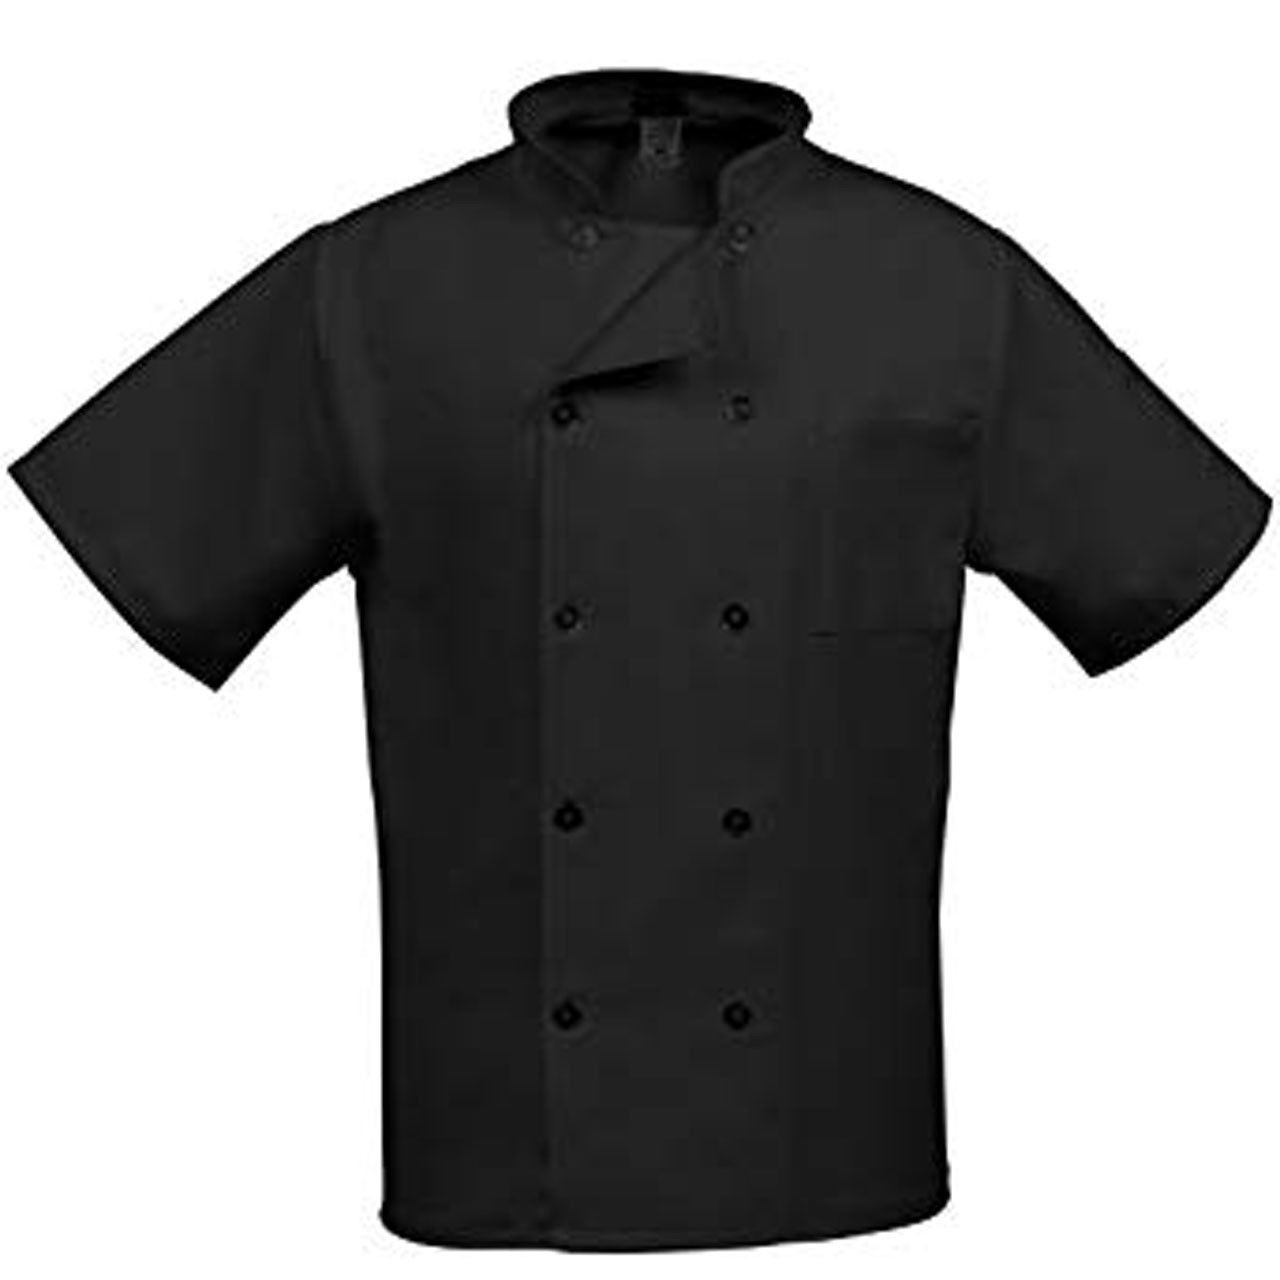 What material is the Classic Short Sleeve Black Chef Coat made from?